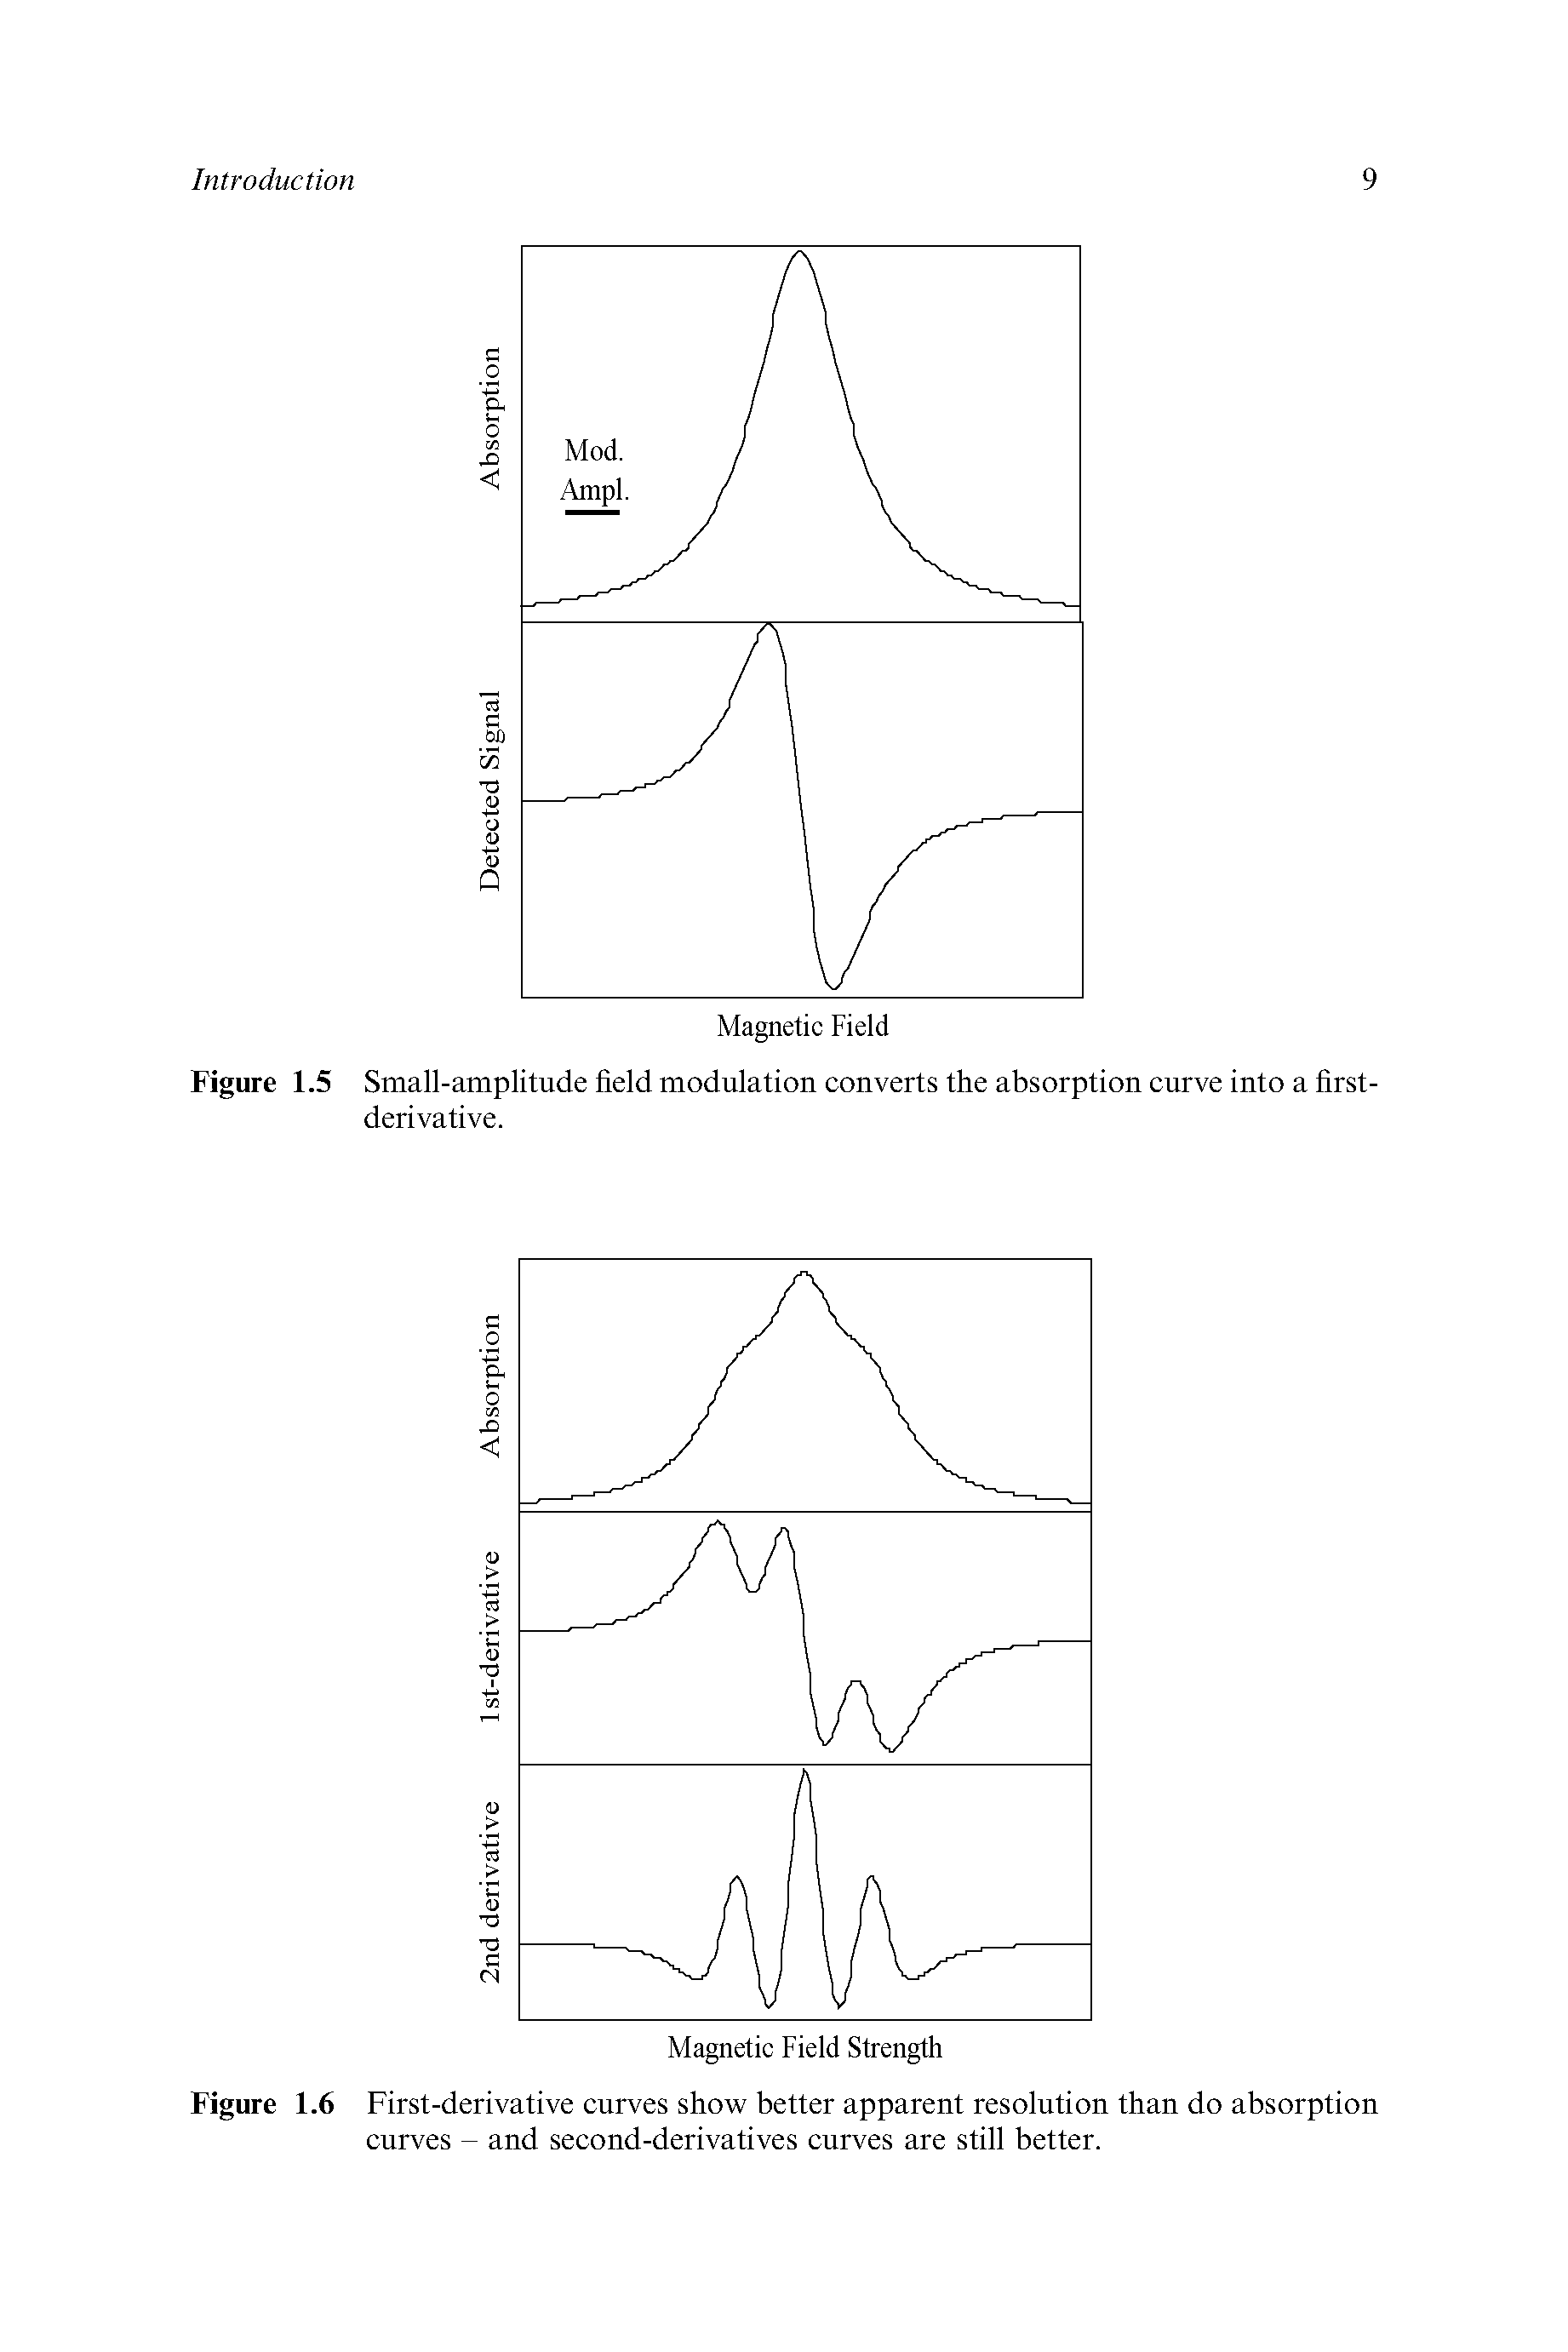 Figure 1.5 Small-amplitude field modulation converts the absorption curve into a first-derivative.